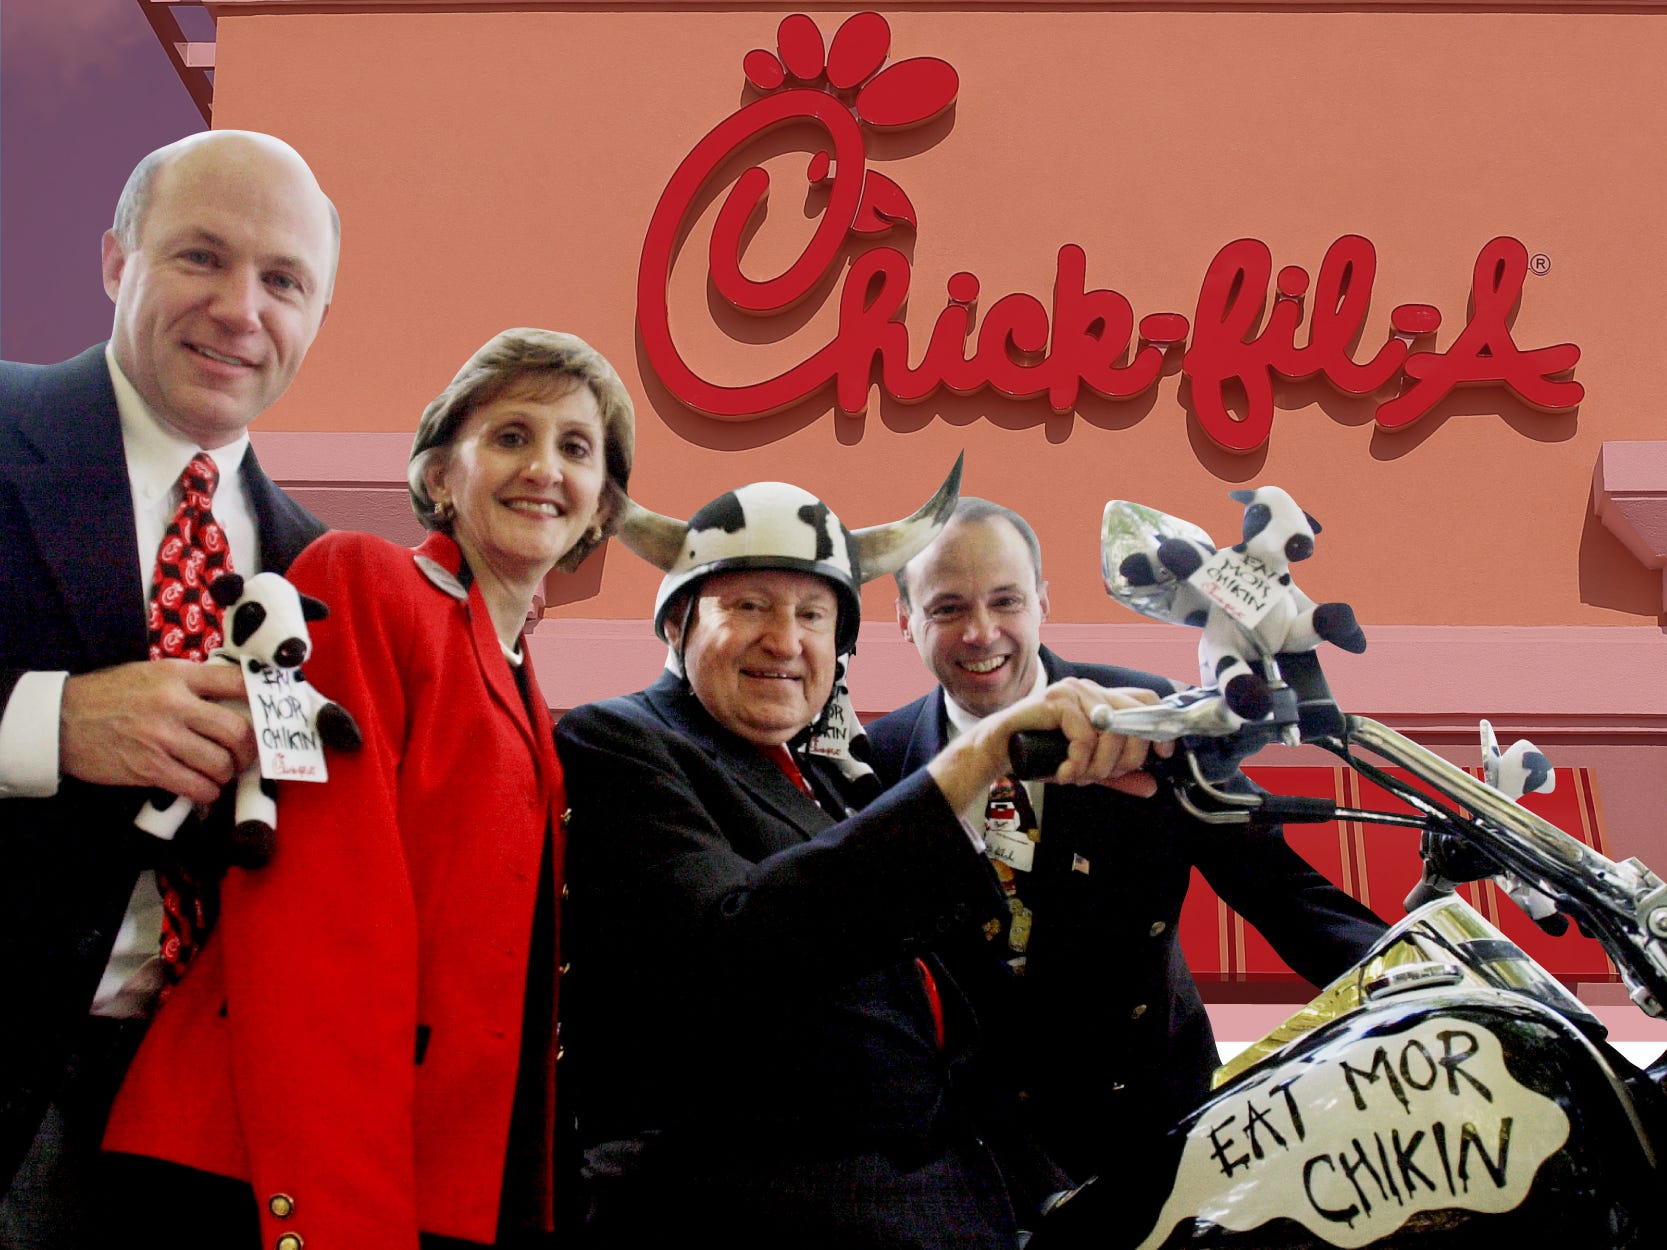 <ul class="summary-list"> <li>The Cathys are the family behind <a href="https://www.businessinsider.com/category/chick-fil-a" rel="noopener">Chick-fil-A</a>, known for its pressure-cooked fried chicken.</li> <li>The combined net worth of the founder's children is $29.1 billion, according to Forbes.  </li> <li>In 2022, Chick-fil-A's 2,800 restaurants generated about $18.8 billion in sales in the US.</li> </ul><p>When it comes to the Cathy family's multibillion-dollar fortune, it's all about the fried chicken. That's because the Cathys are the family behind the Chick-fil-A empire. </p><p><a href="https://www.businessinsider.com/meet-chick-fil-a-founder-s-truett-cathy-2012-7" rel="noopener">S. Truett Cathy</a> officially founded the popular fast-food chain in the late 1960s, laying the roots for what is today one of America's richest family dynasties, according to <a href="https://www.forbes.com/profile/cathy/?sh=22eca8d42e94" rel="noopener">Forbes</a>. Like burger institution <a href="https://www.businessinsider.com/in-n-out-family-dynasty-lynsi-snyder-harry-esther-over-75-years" rel="noopener">In-N-Out, solely run by the Snyder family</a>, Chick-fil-A has always been led by a member of the Cathy family.</p><p>Truett's son, Dan Cathy, served as CEO from 2013 to 2021. Dan's son, Andrew, has run the chain as CEO since November 2021. He is only the third member of the Cathy family to lead Chick-fil-A since it was founded in 1967.  Dan Cathy, whose net worth is <a href="https://www.forbes.com/profile/dan-cathy/?sh=6381e937b9d2" rel="noopener">$9.7 billion</a>, remains board chairman of the chain. </p><p>Born and raised in the South, the Cathy family has been dedicated to continuing Truett's legacy, growing <a href="https://www.businessinsider.com/chick-fil-a-opens-on-sunday-during-hurricane-florence-2018-9" rel="noopener">Chick-fil-A </a>across the US to 2,800 restaurants. In September, the <a href="https://www.businessinsider.com/chick-fil-a-plans-uk-return-after-past-anti-lgbtq-controversy-2023-9">chain announced plans to expand to the UK</a>.</p><p><a href="https://www.businessinsider.com/what-it-costs-to-open-a-chick-fil-a-2016-1" rel="noopener">Chick-fil-A</a> has been celebrated for its company culture, customer service, and quality food, but it has also <a href="https://www.businessinsider.com/chick-fil-a-ties-to-anti-equality-act-efforts-explained-2021-6">received backlash over anti-same-sex marriage </a>beliefs that align with the Cathys' Christian upbringing.</p><p>"At Chick-fil-A, we are very grounded on our corporate purpose, to be a purpose-driven organization," Dan Cathy said during an interview with <a href="https://chiefexecutive.net/chick-fil-as-dan-cathy-on-exceeding-customer-expectations/" rel="noopener">Chief Executive magazine</a>. "That purpose is defined in the statement that we're here to glorify God by being a faithful steward of all that's entrusted to us and have a positive influence on all who come in contact with Chick-fil-A."</p><p>Take a look inside the rise of <a href="https://www.businessinsider.com/chick-fil-a-to-be-third-largest-restaurant-chain-analyst-says-2018-12" rel="noopener">Chick-fil-A</a> and the family behind it.</p><div class="read-original">Read the original article on <a href="https://www.businessinsider.com/cathy-family-chick-fil-a-fortune-net-worth-lifestyle-photos-2019-3">Business Insider</a></div>